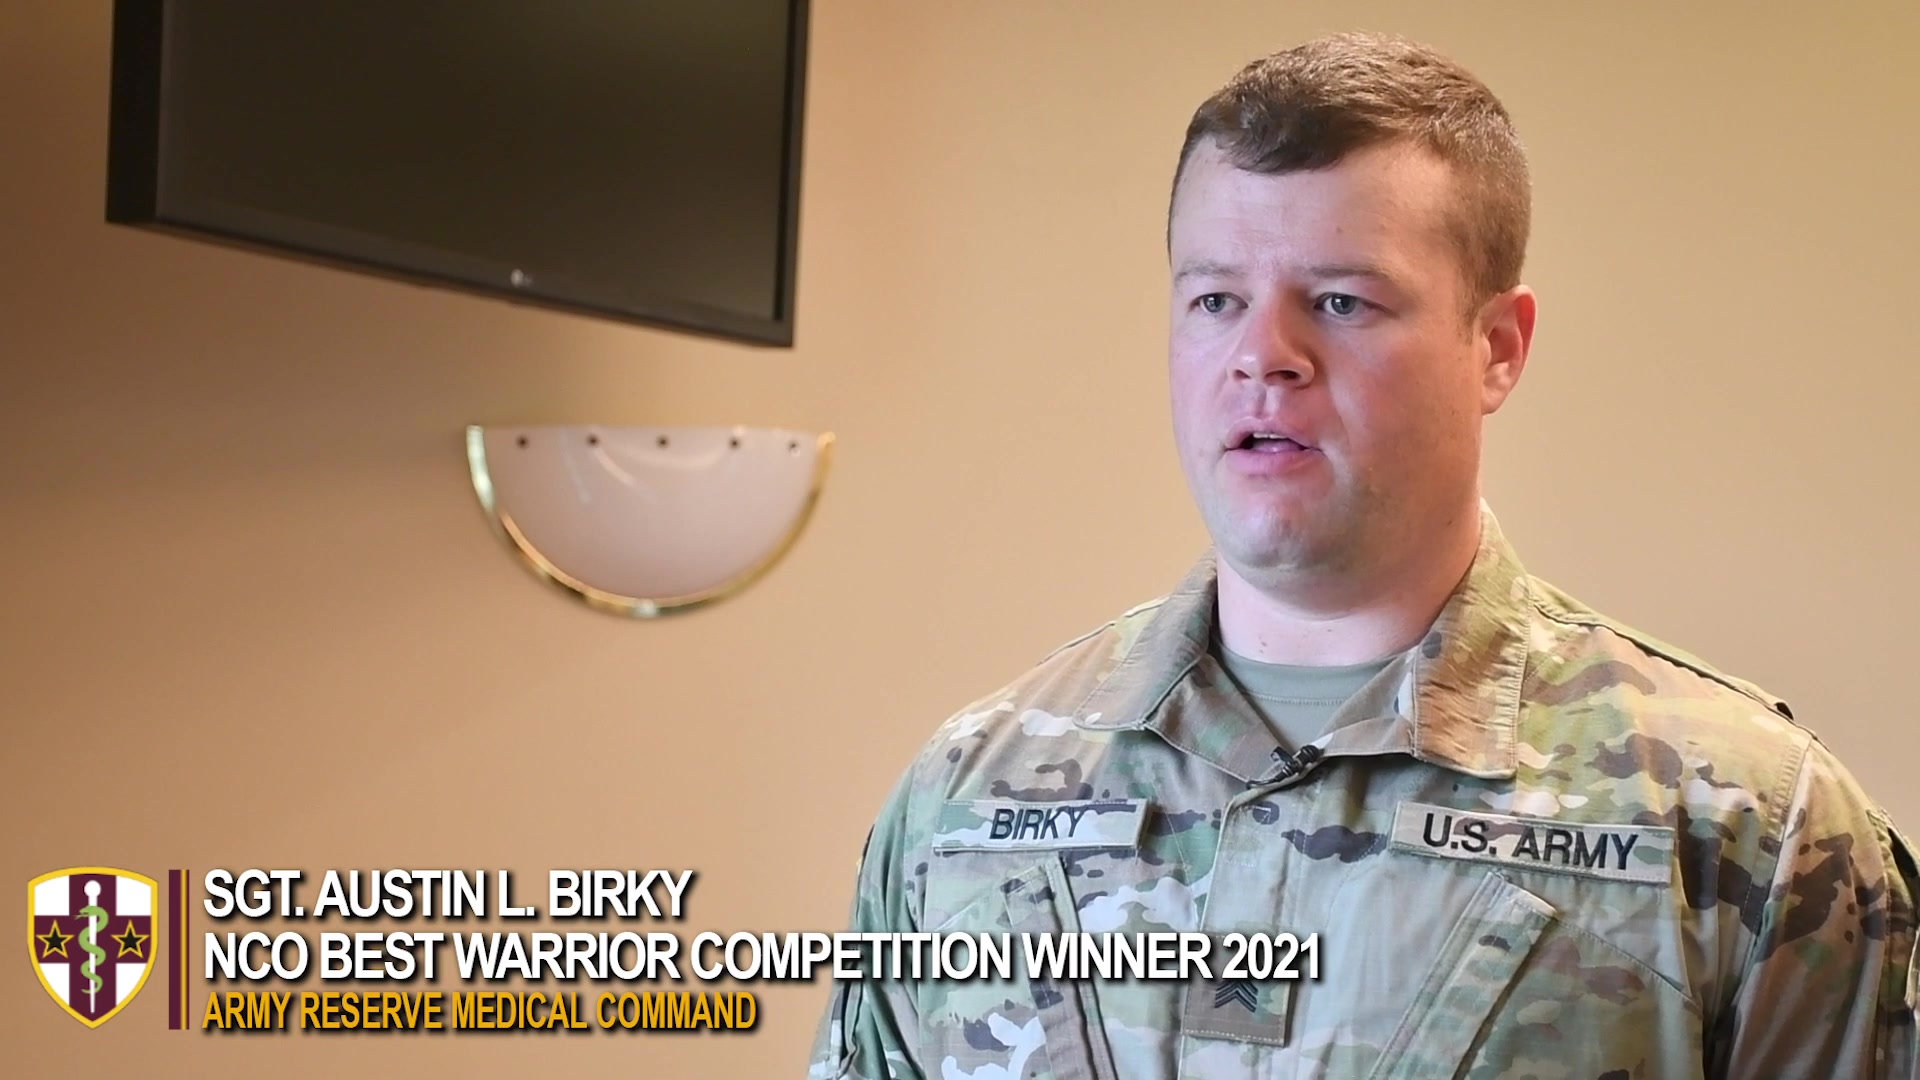 Sgt. Austin Birky, an Army Reserve dental assistant from Logan, Utah, shares his thoughts about the 2021 AR-MEDCOM Best Warrior Competition.